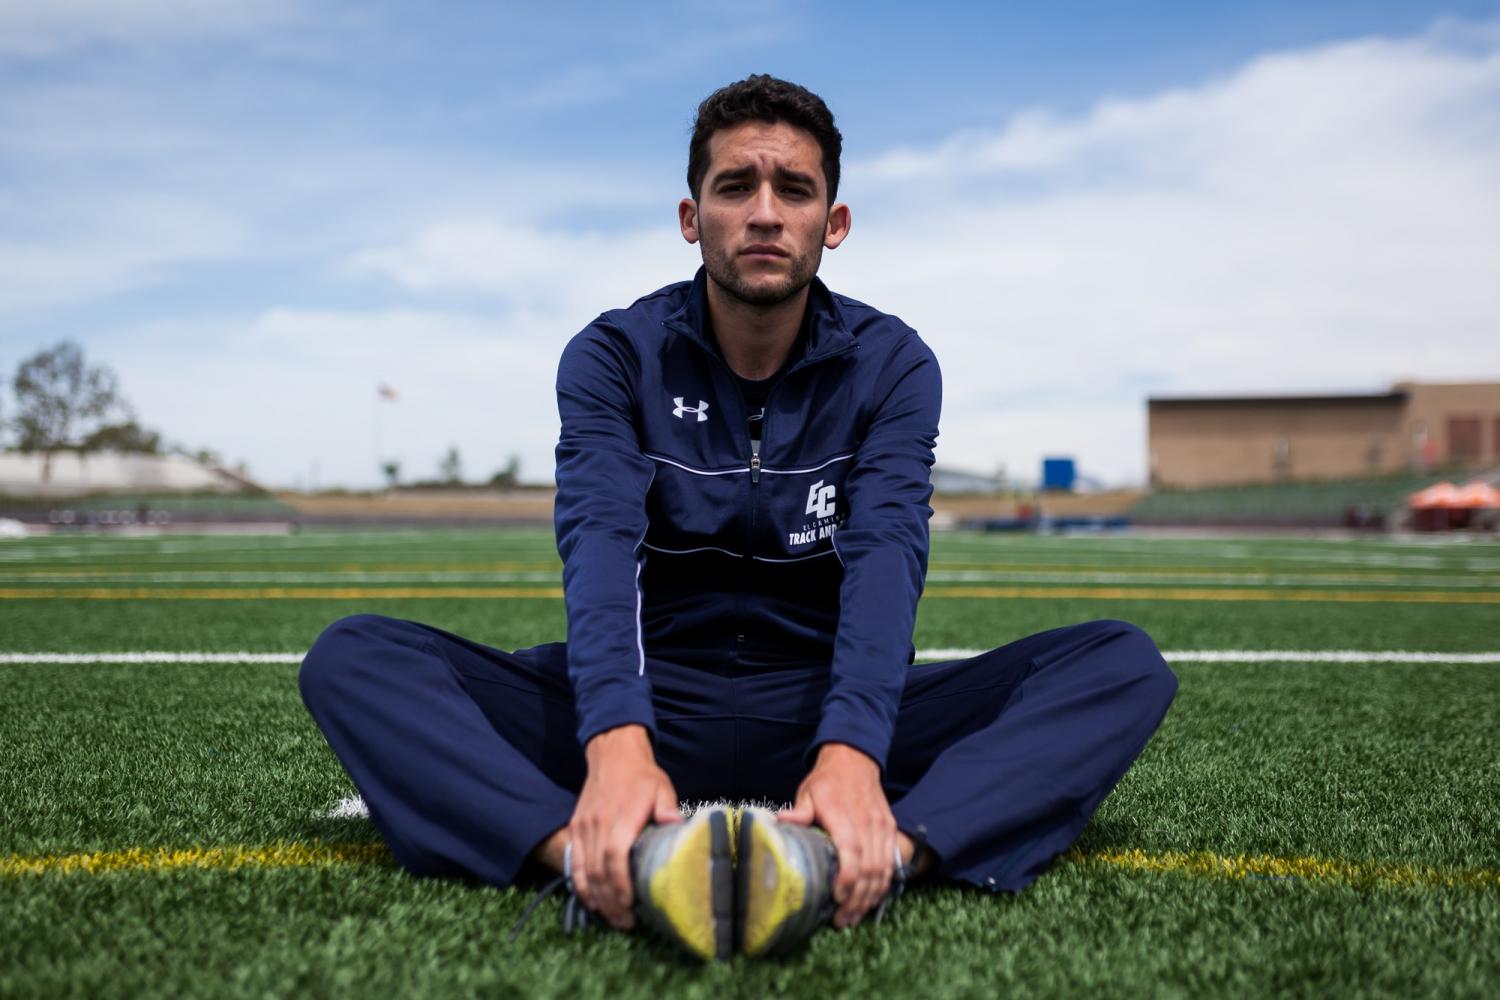 Israel Cardona, 21, business major crosses his legs and focuses before running on the track for the South Coast Conference preliminaries on Tuesday, April 25 at Murdock Stadium. Photo credit: John Lopez